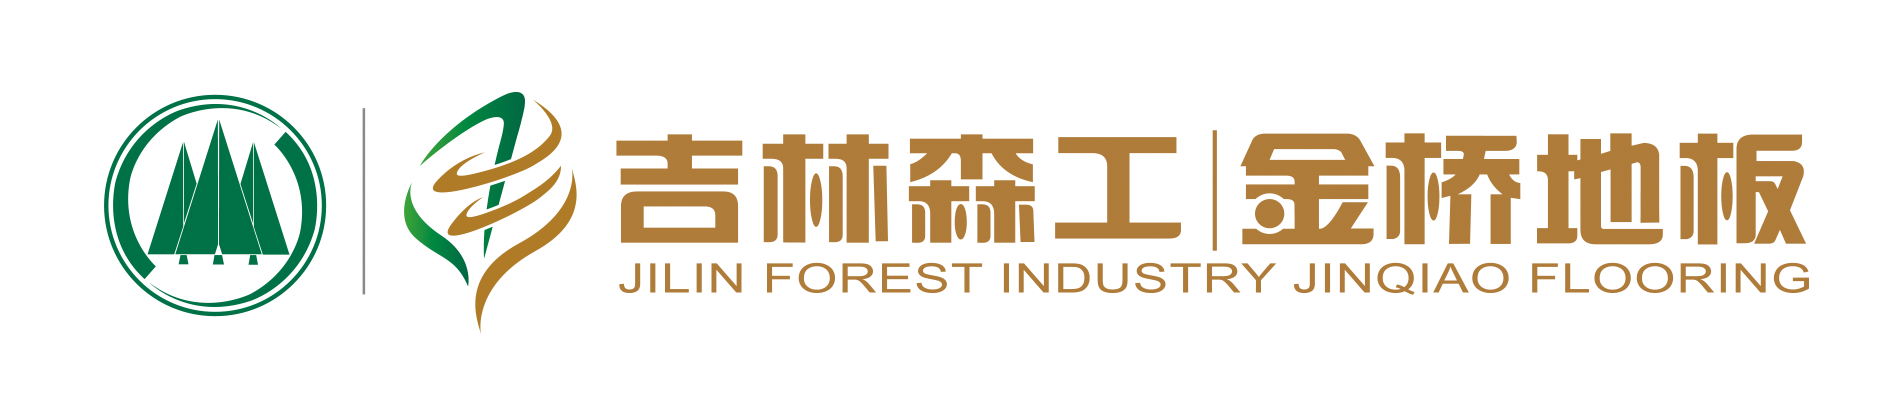 JILIN FOREST INDUSTRY JINQIAO FLOORING GROUP CO。、LTD。